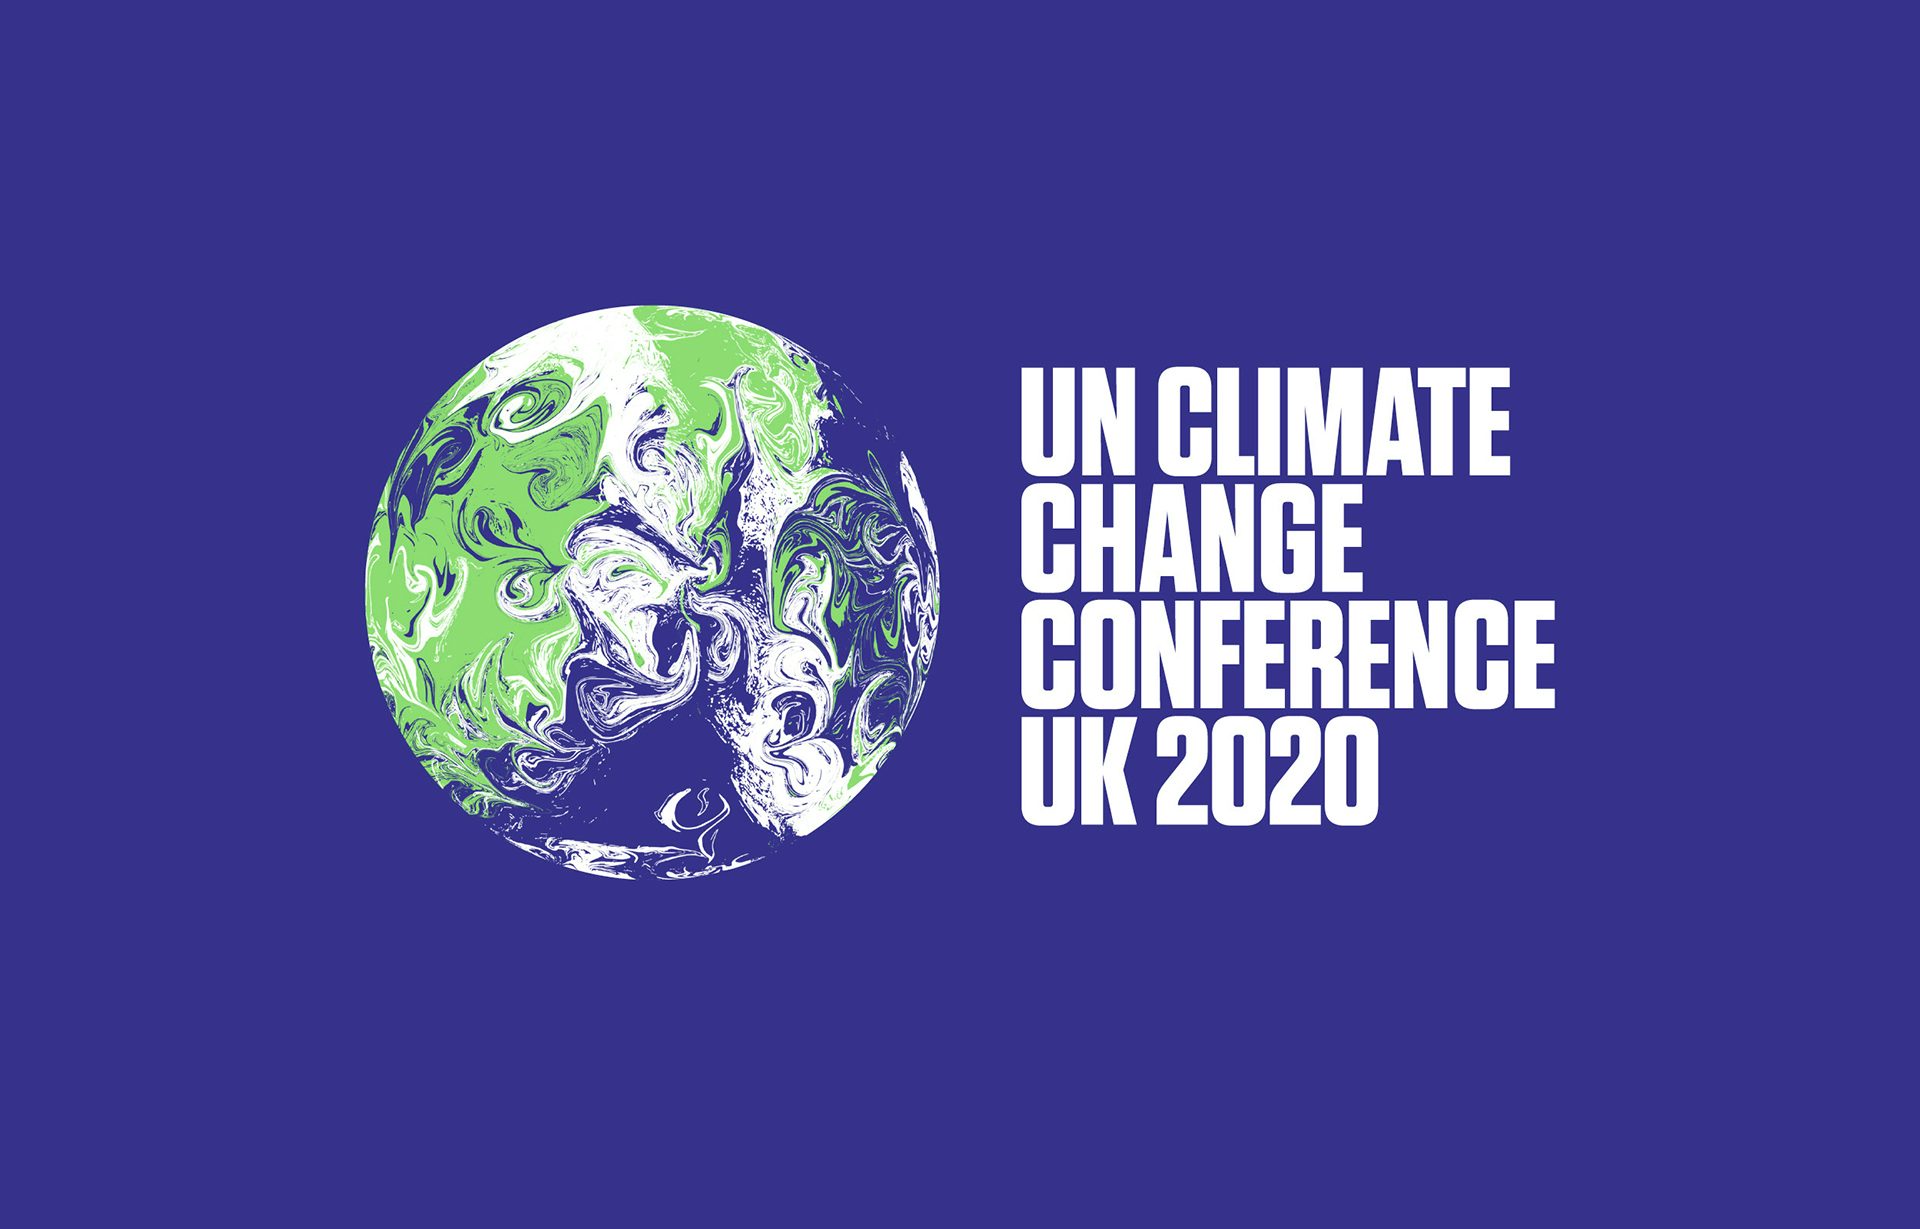 The main design for the COP26 identity by Johnson Banks